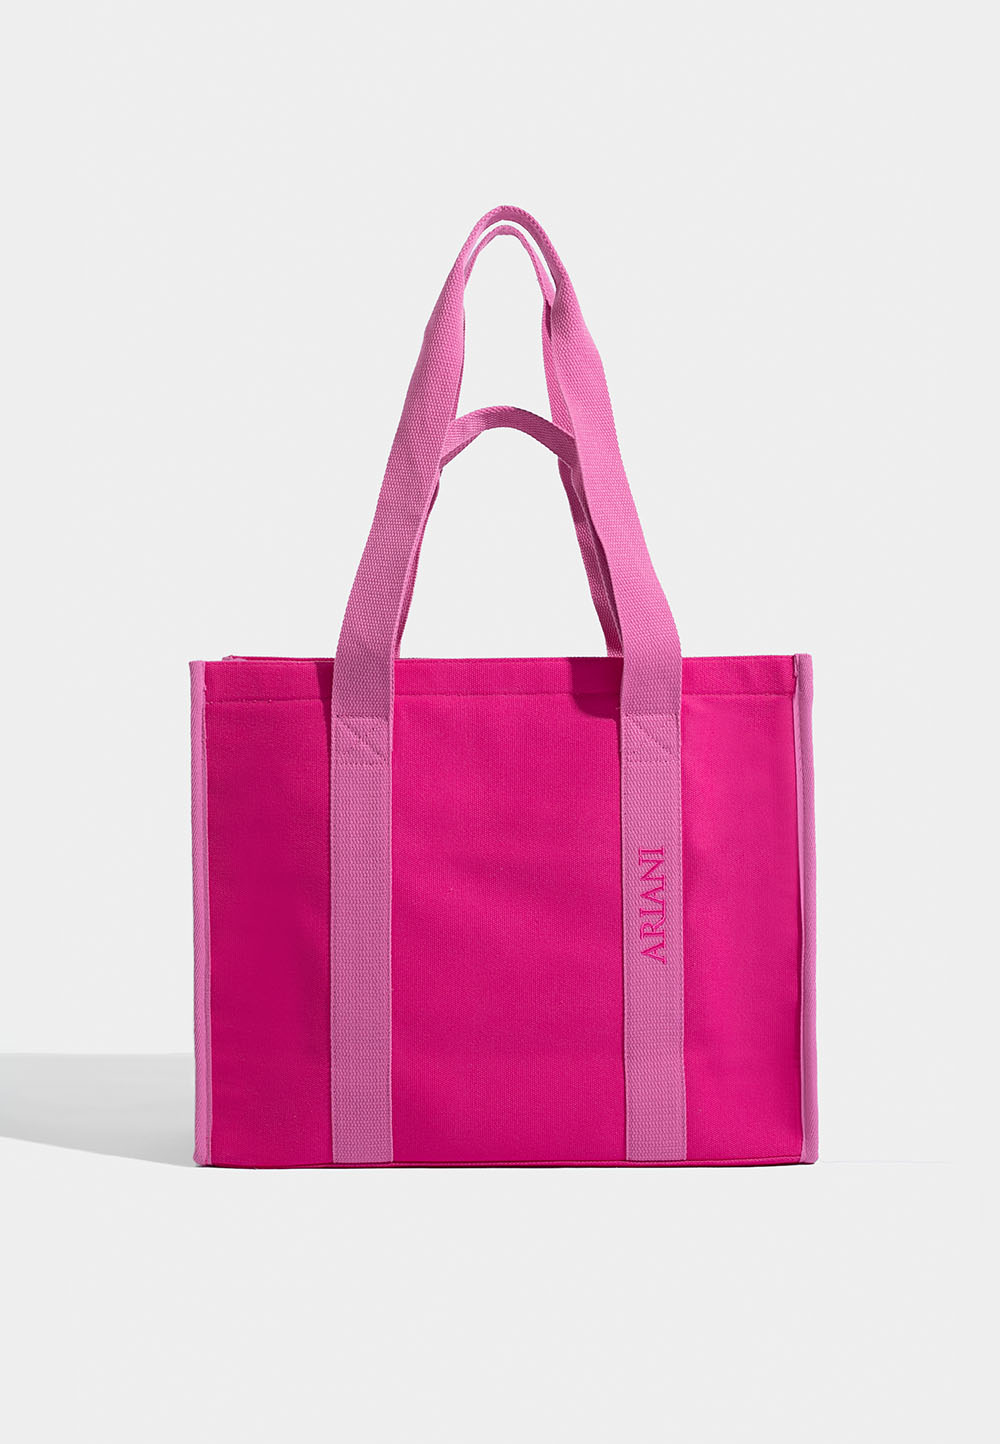 TOTES ON THE GO